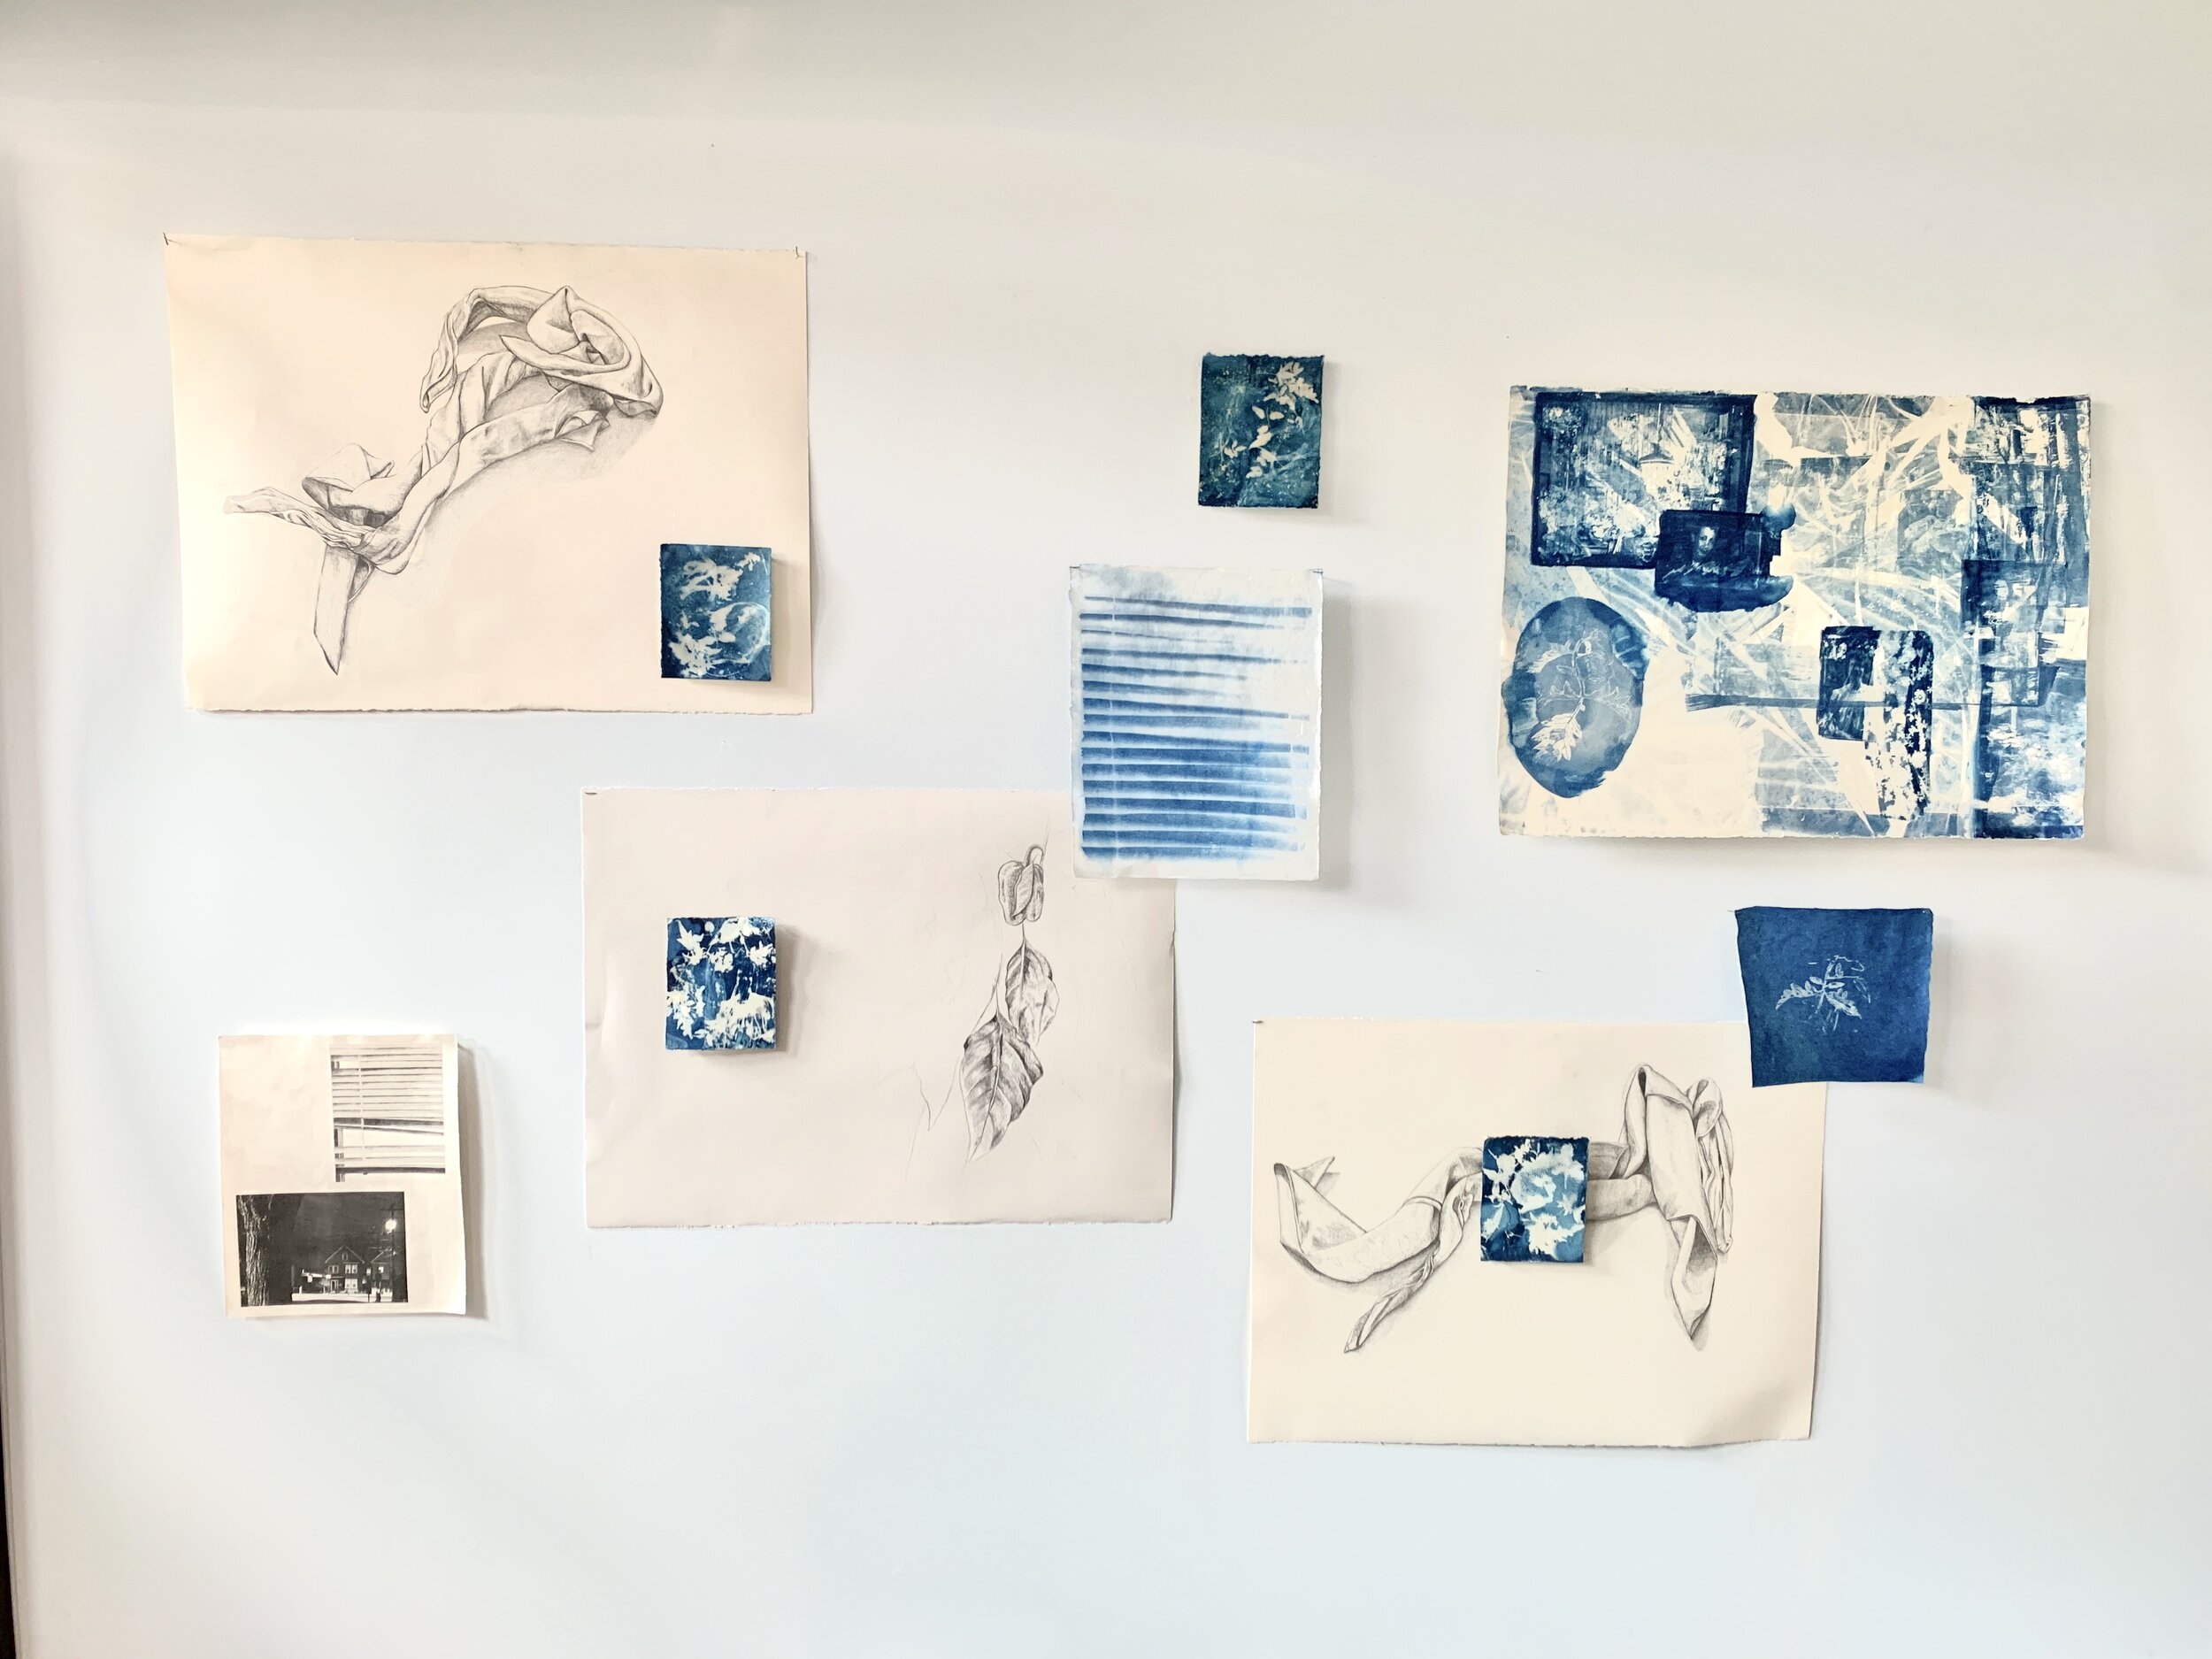   of tabernacle ; cyanotype, graphite, lithograph; size variable 